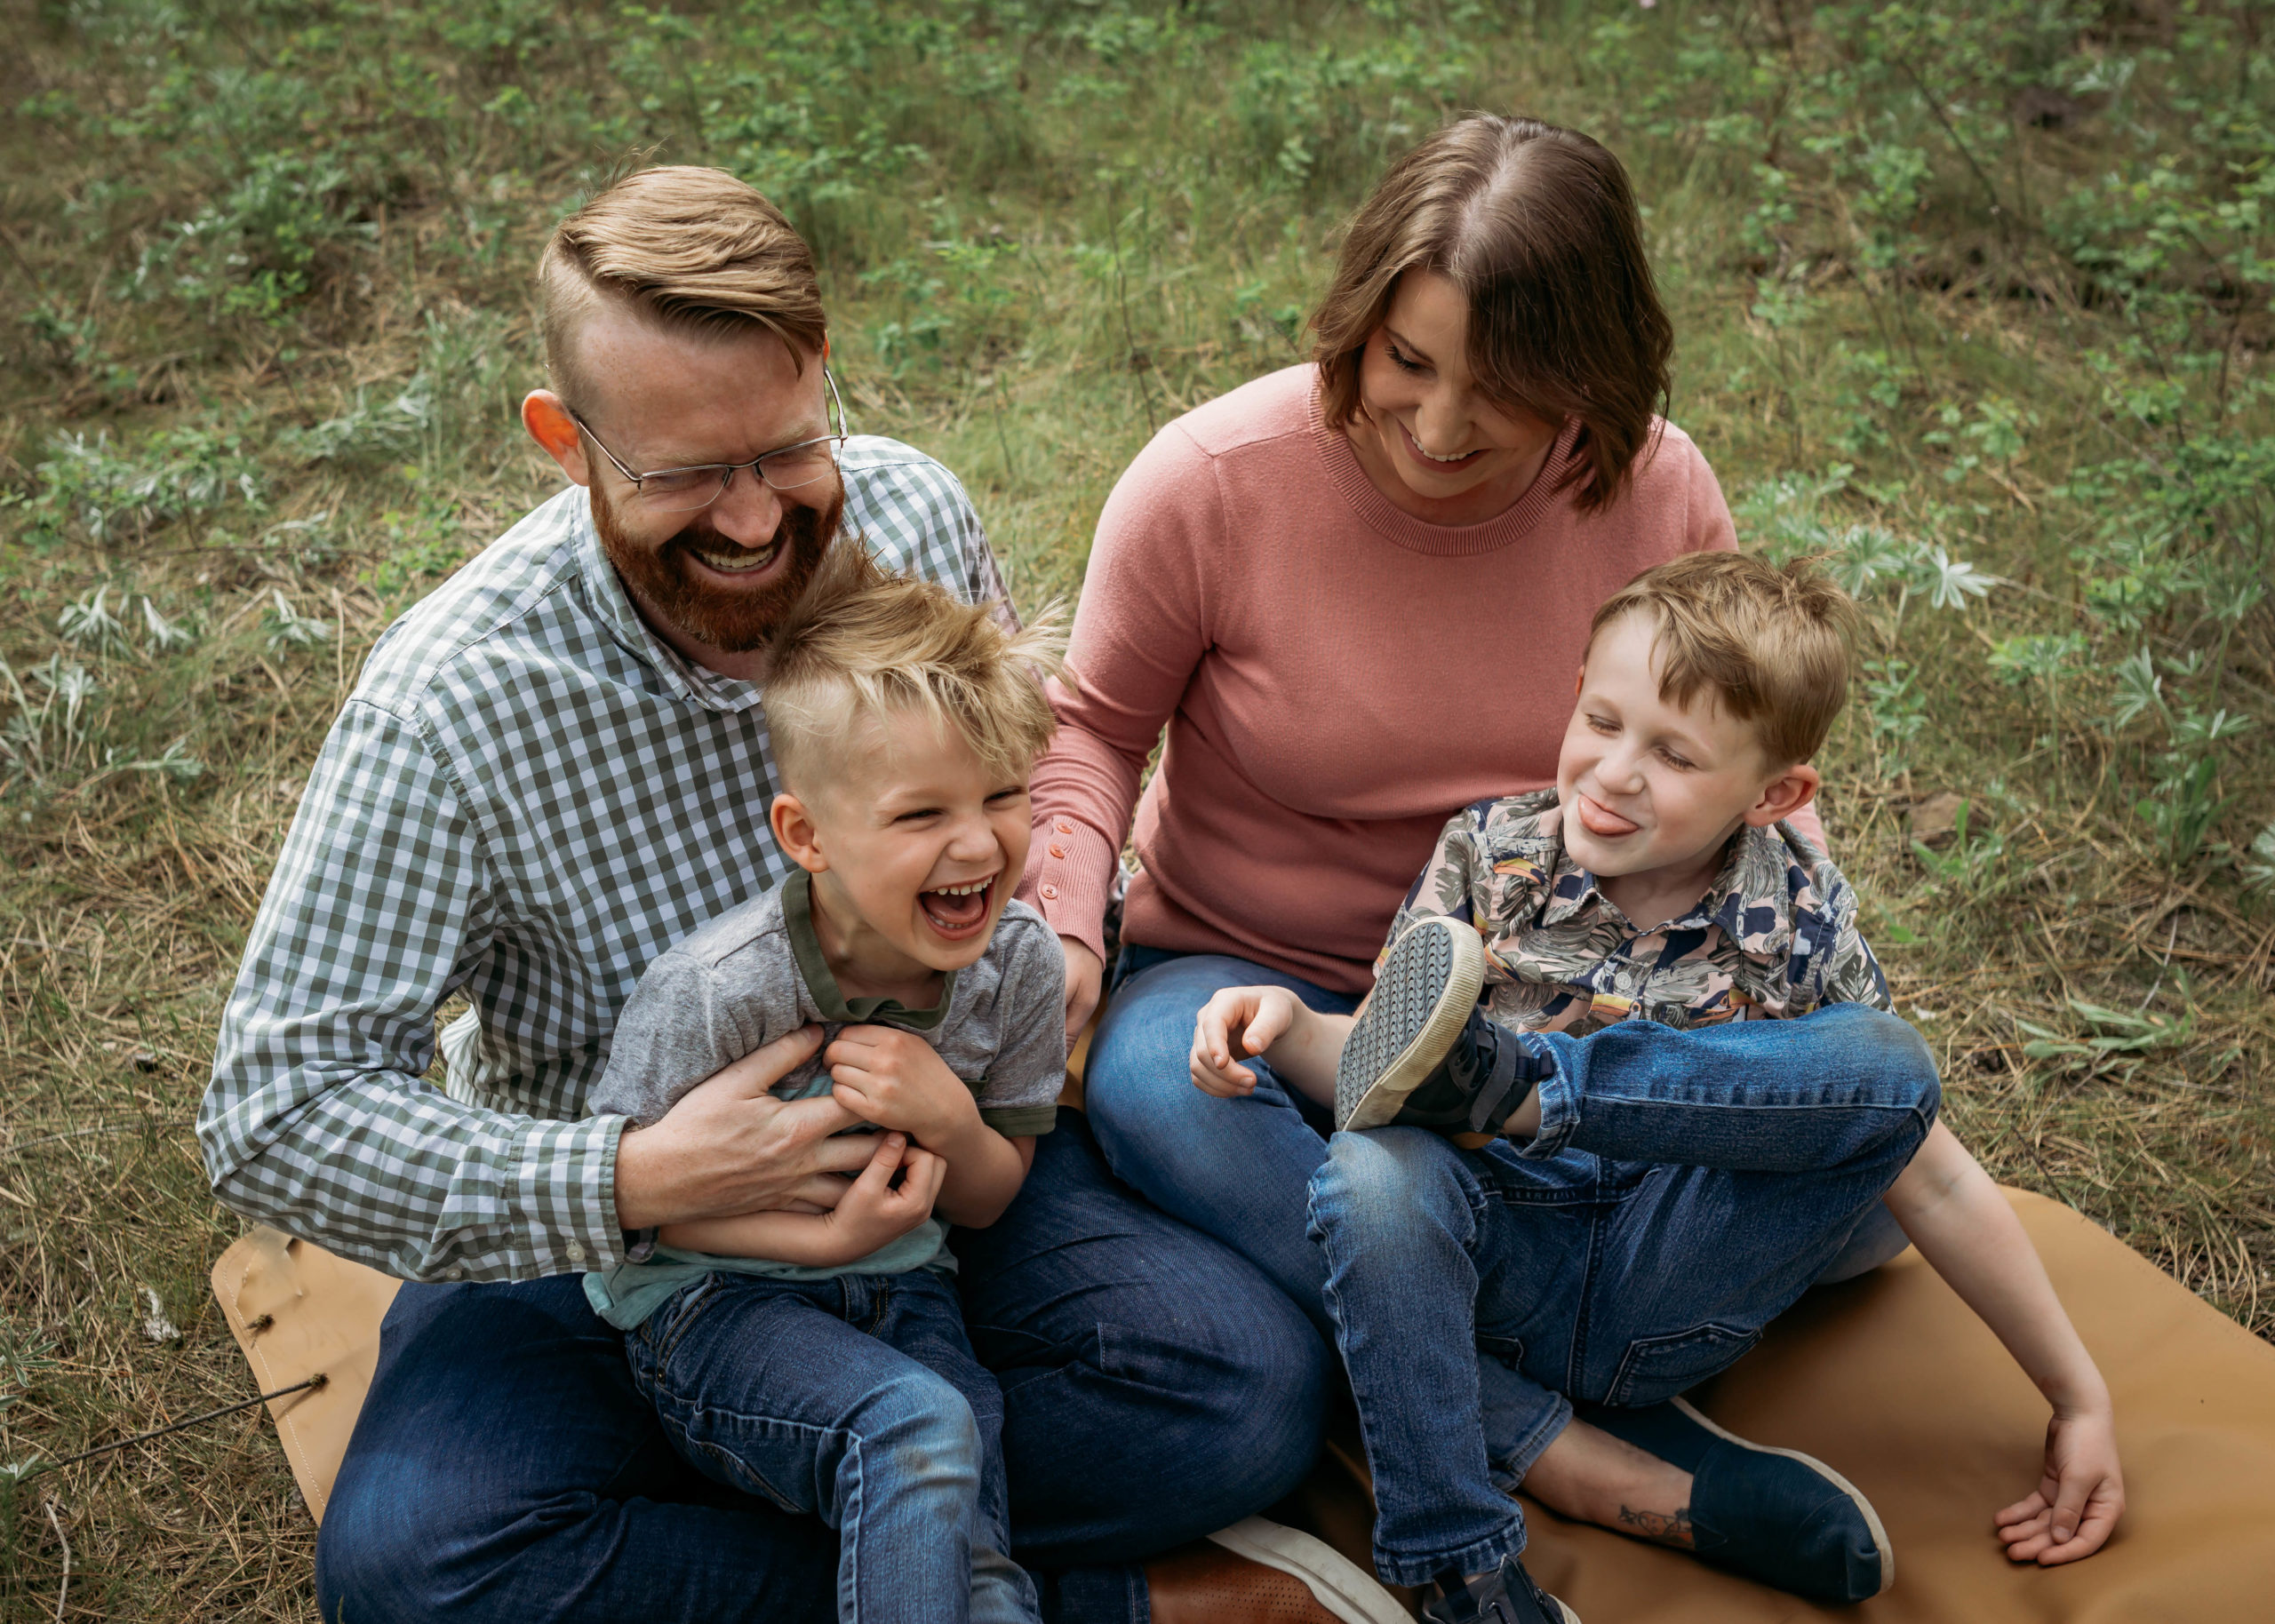 Spokane Family of 4 has fun during their family photography session